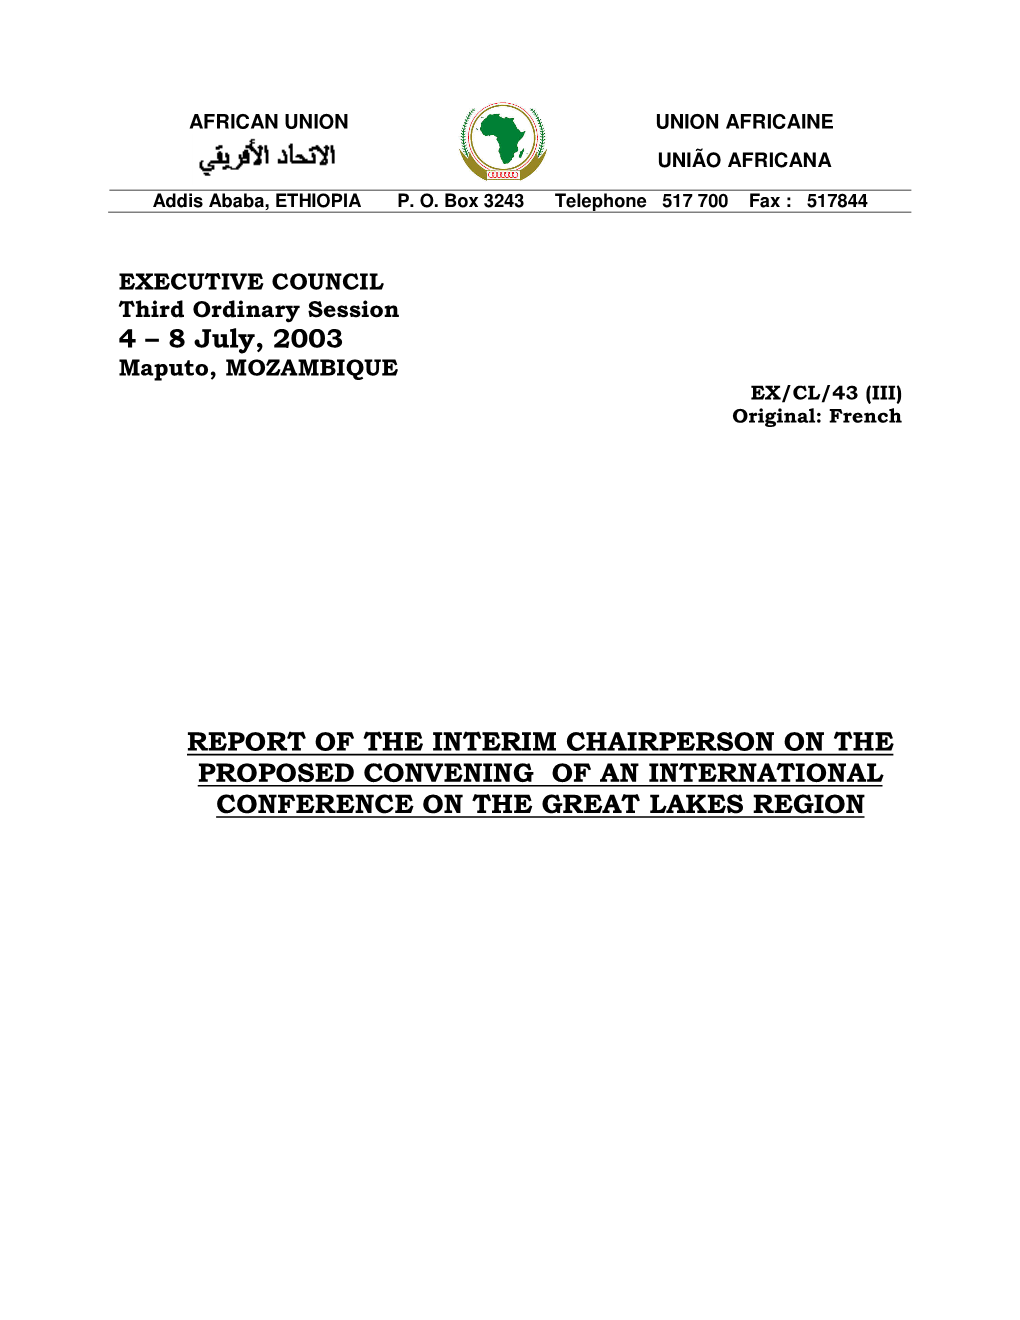 4 – 8 July, 2003 REPORT of the INTERIM CHAIRPERSON on the PROPOSED CONVENING of an INTERNATIONAL CONFERENCE on the GREAT LAKE